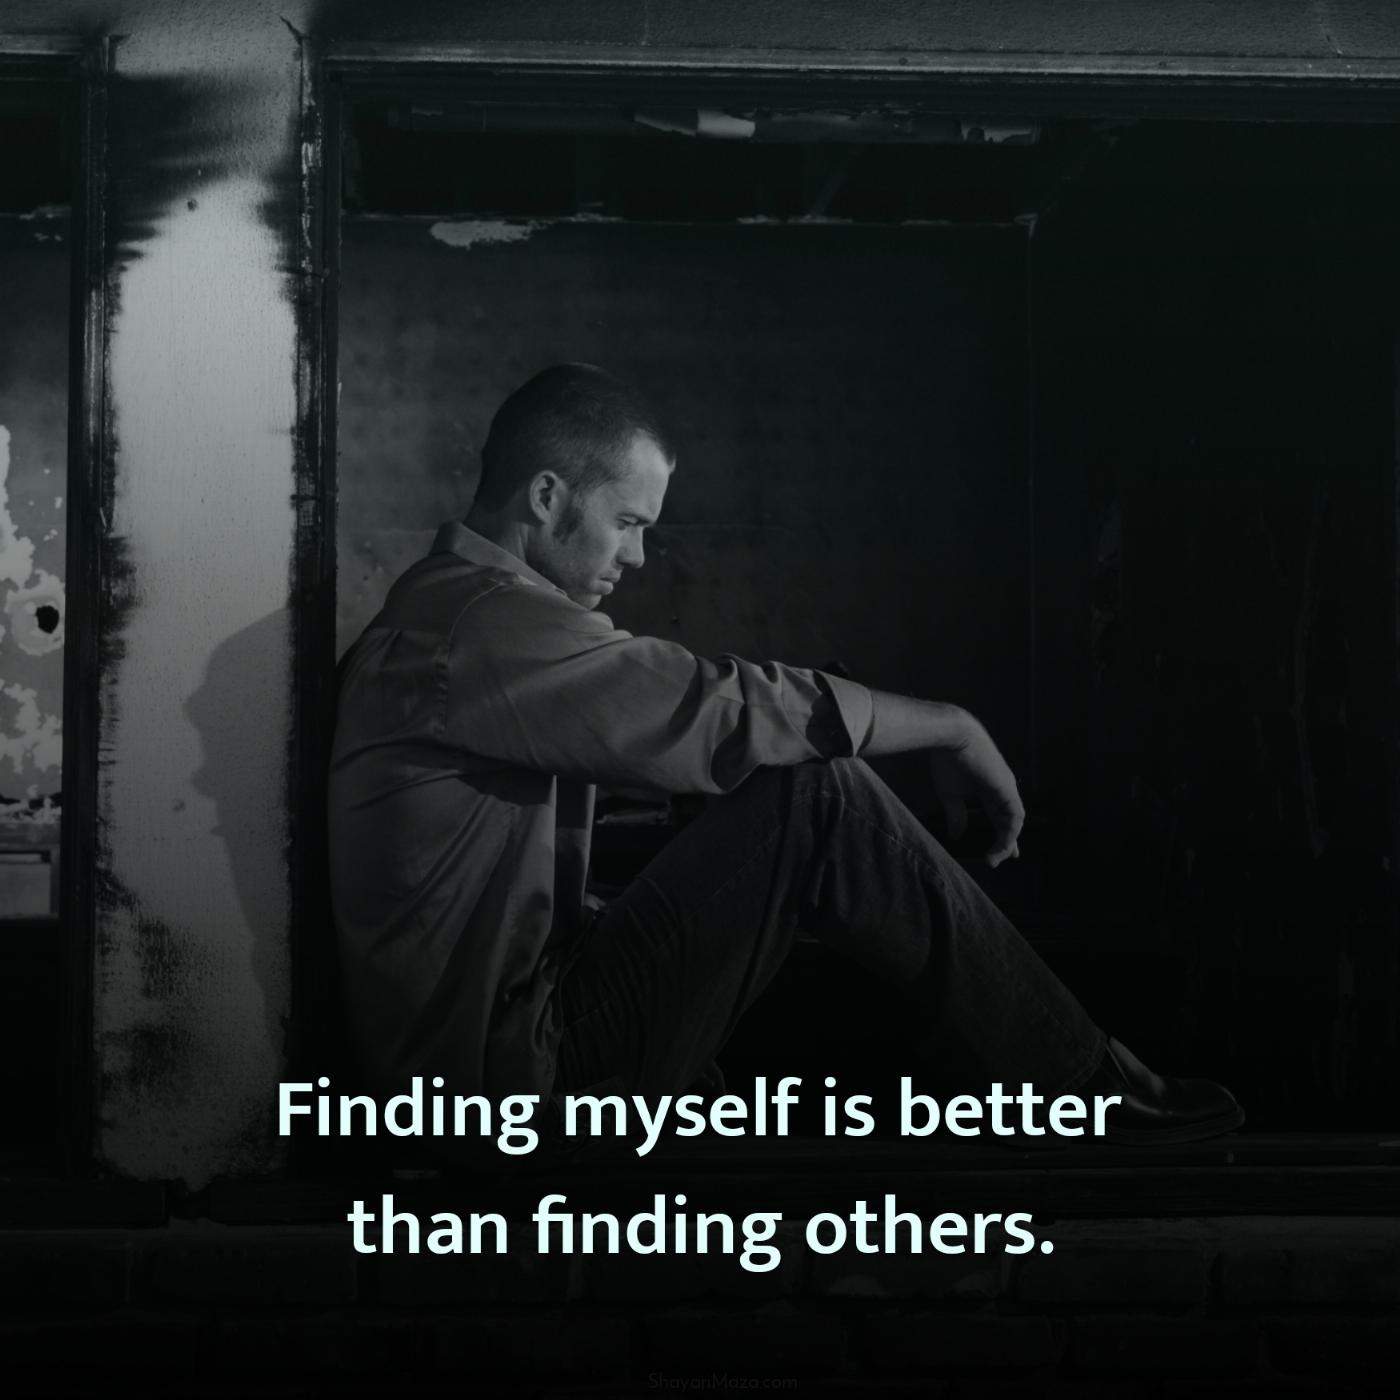 Finding myself is better than finding others